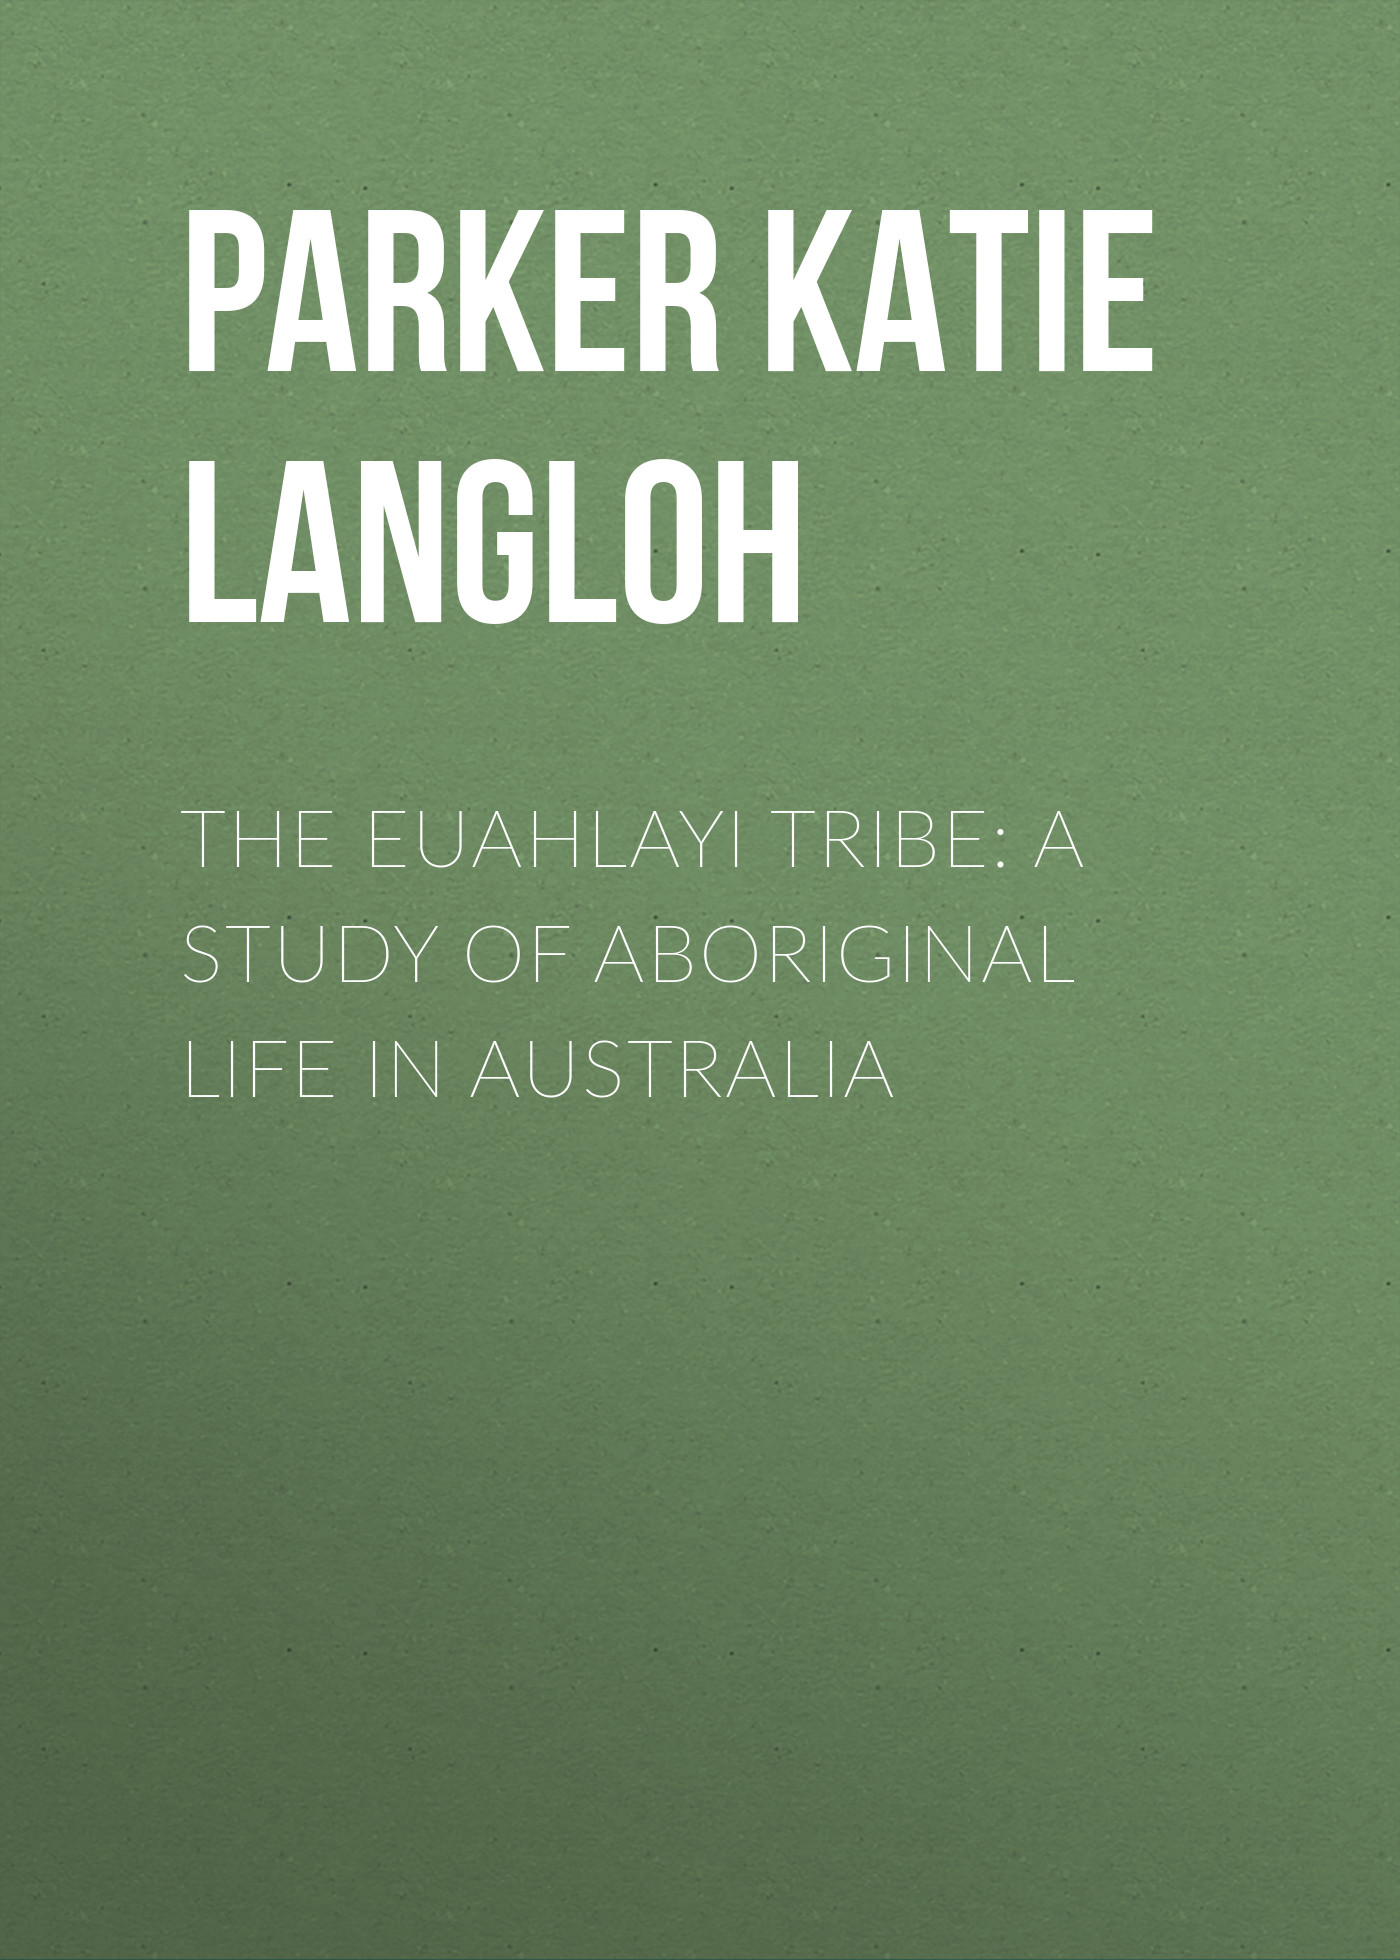 Parker Katie Langloh The Euahlayi Tribe: A Study of Aboriginal Life in Australia